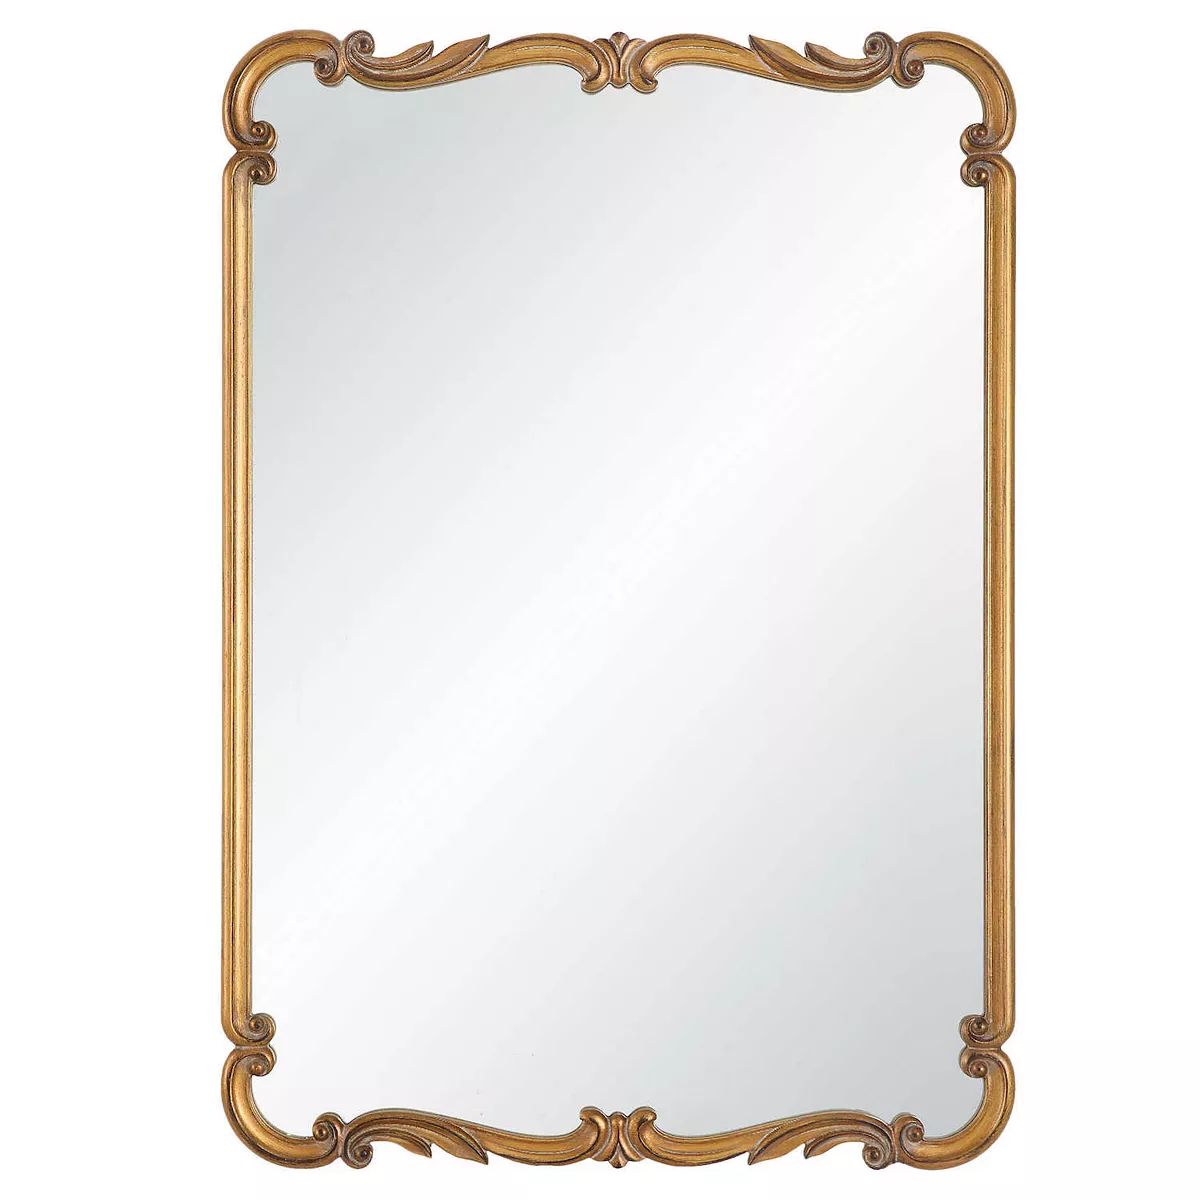 Ornate Gold Wall Mirror | Kohl's